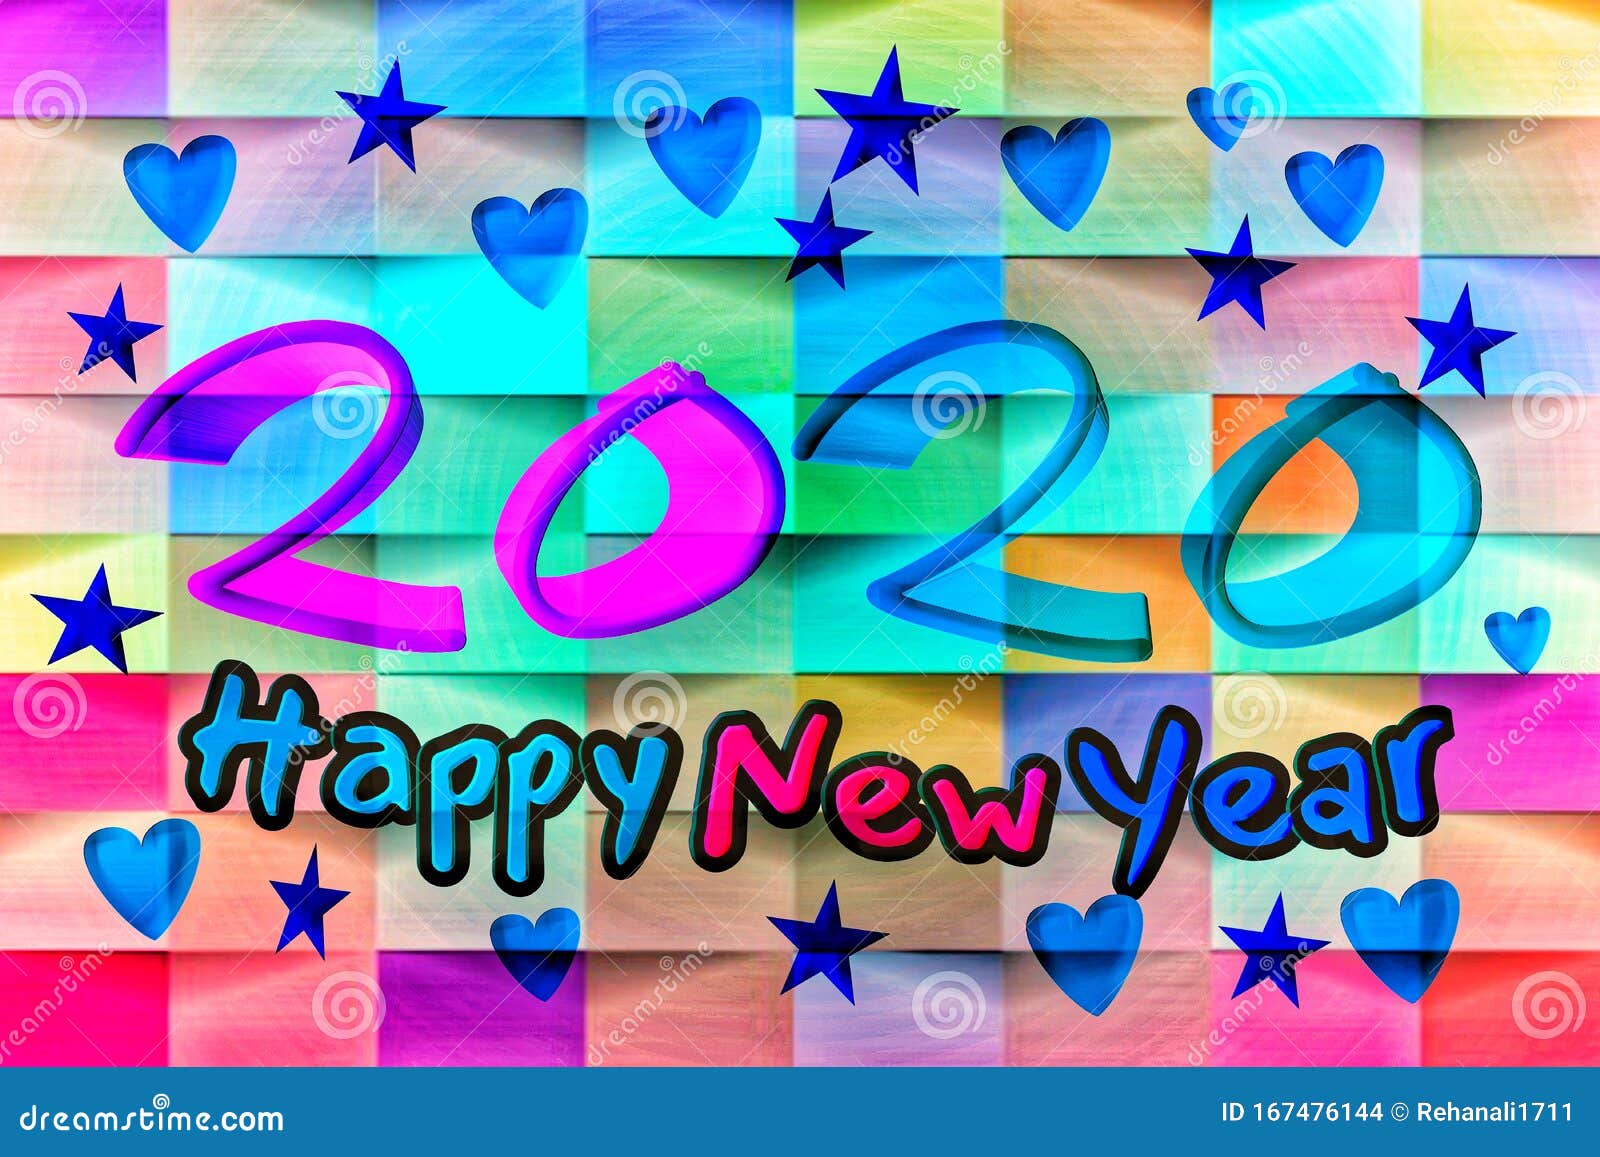 Happy New Year 2020 Banner. Happy New Year 2020 Design with Love ...